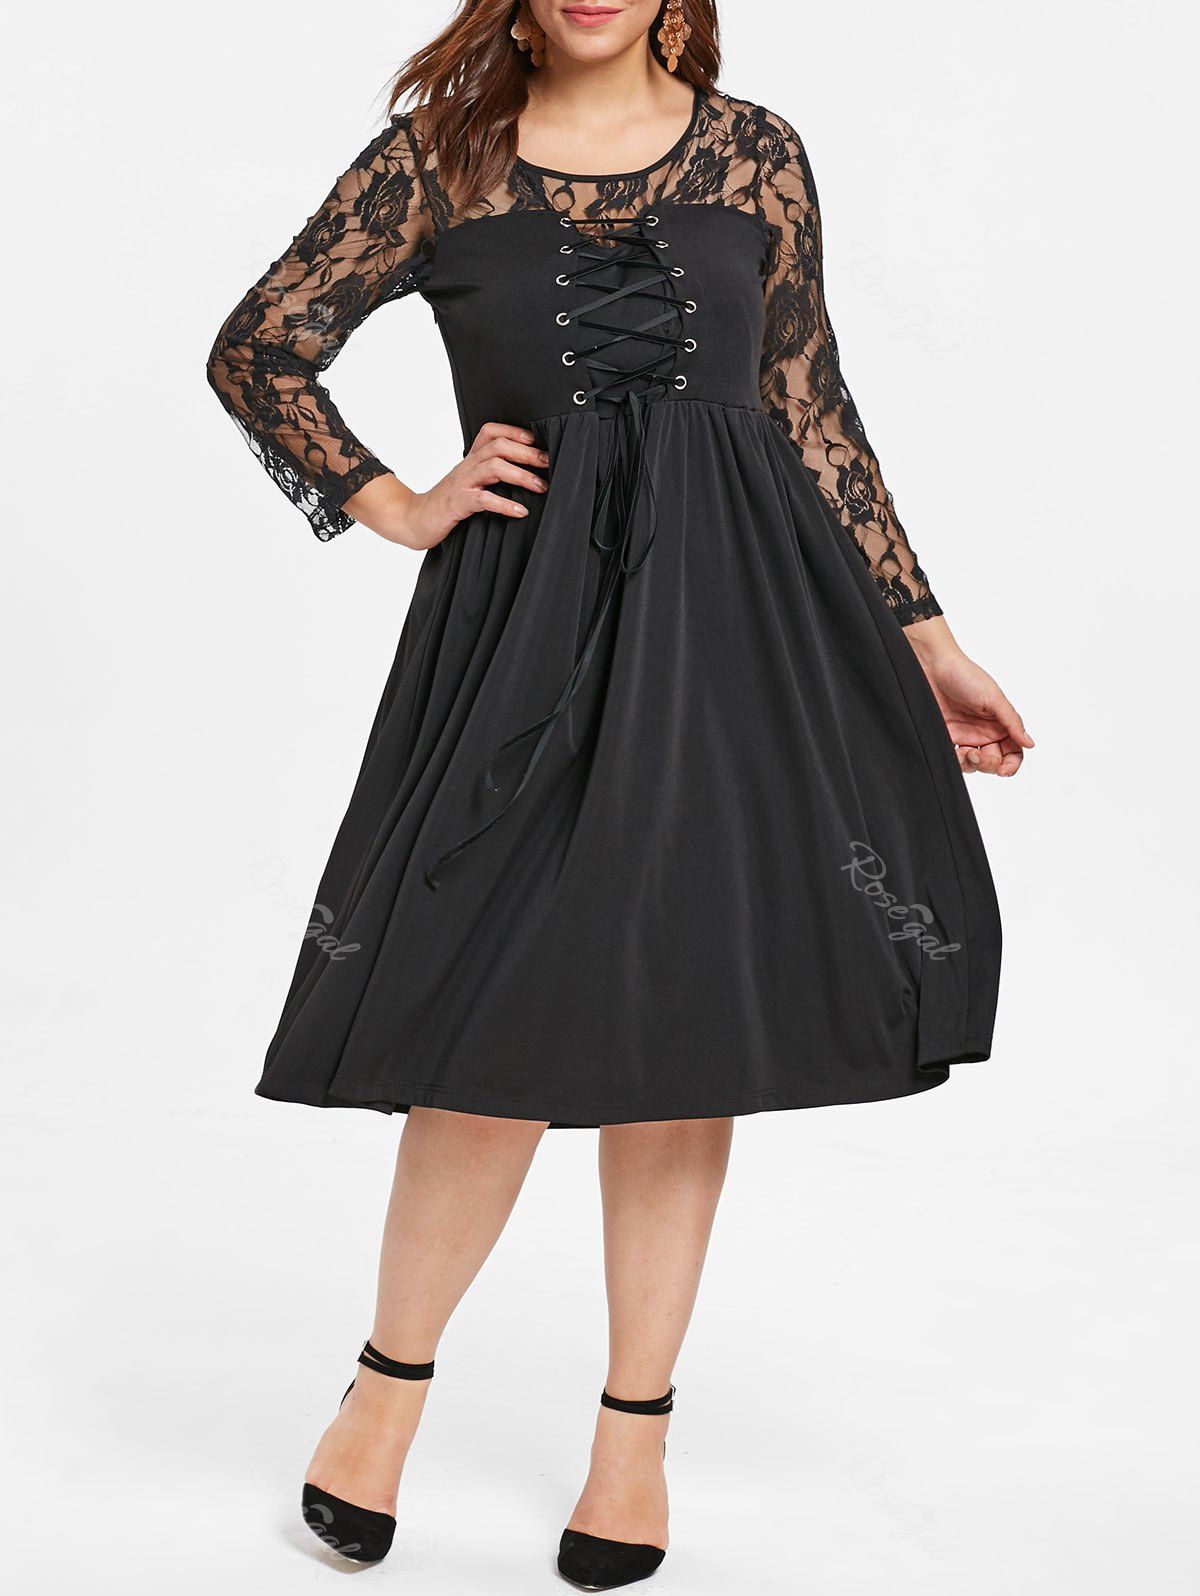 plus size dresses 4x and up